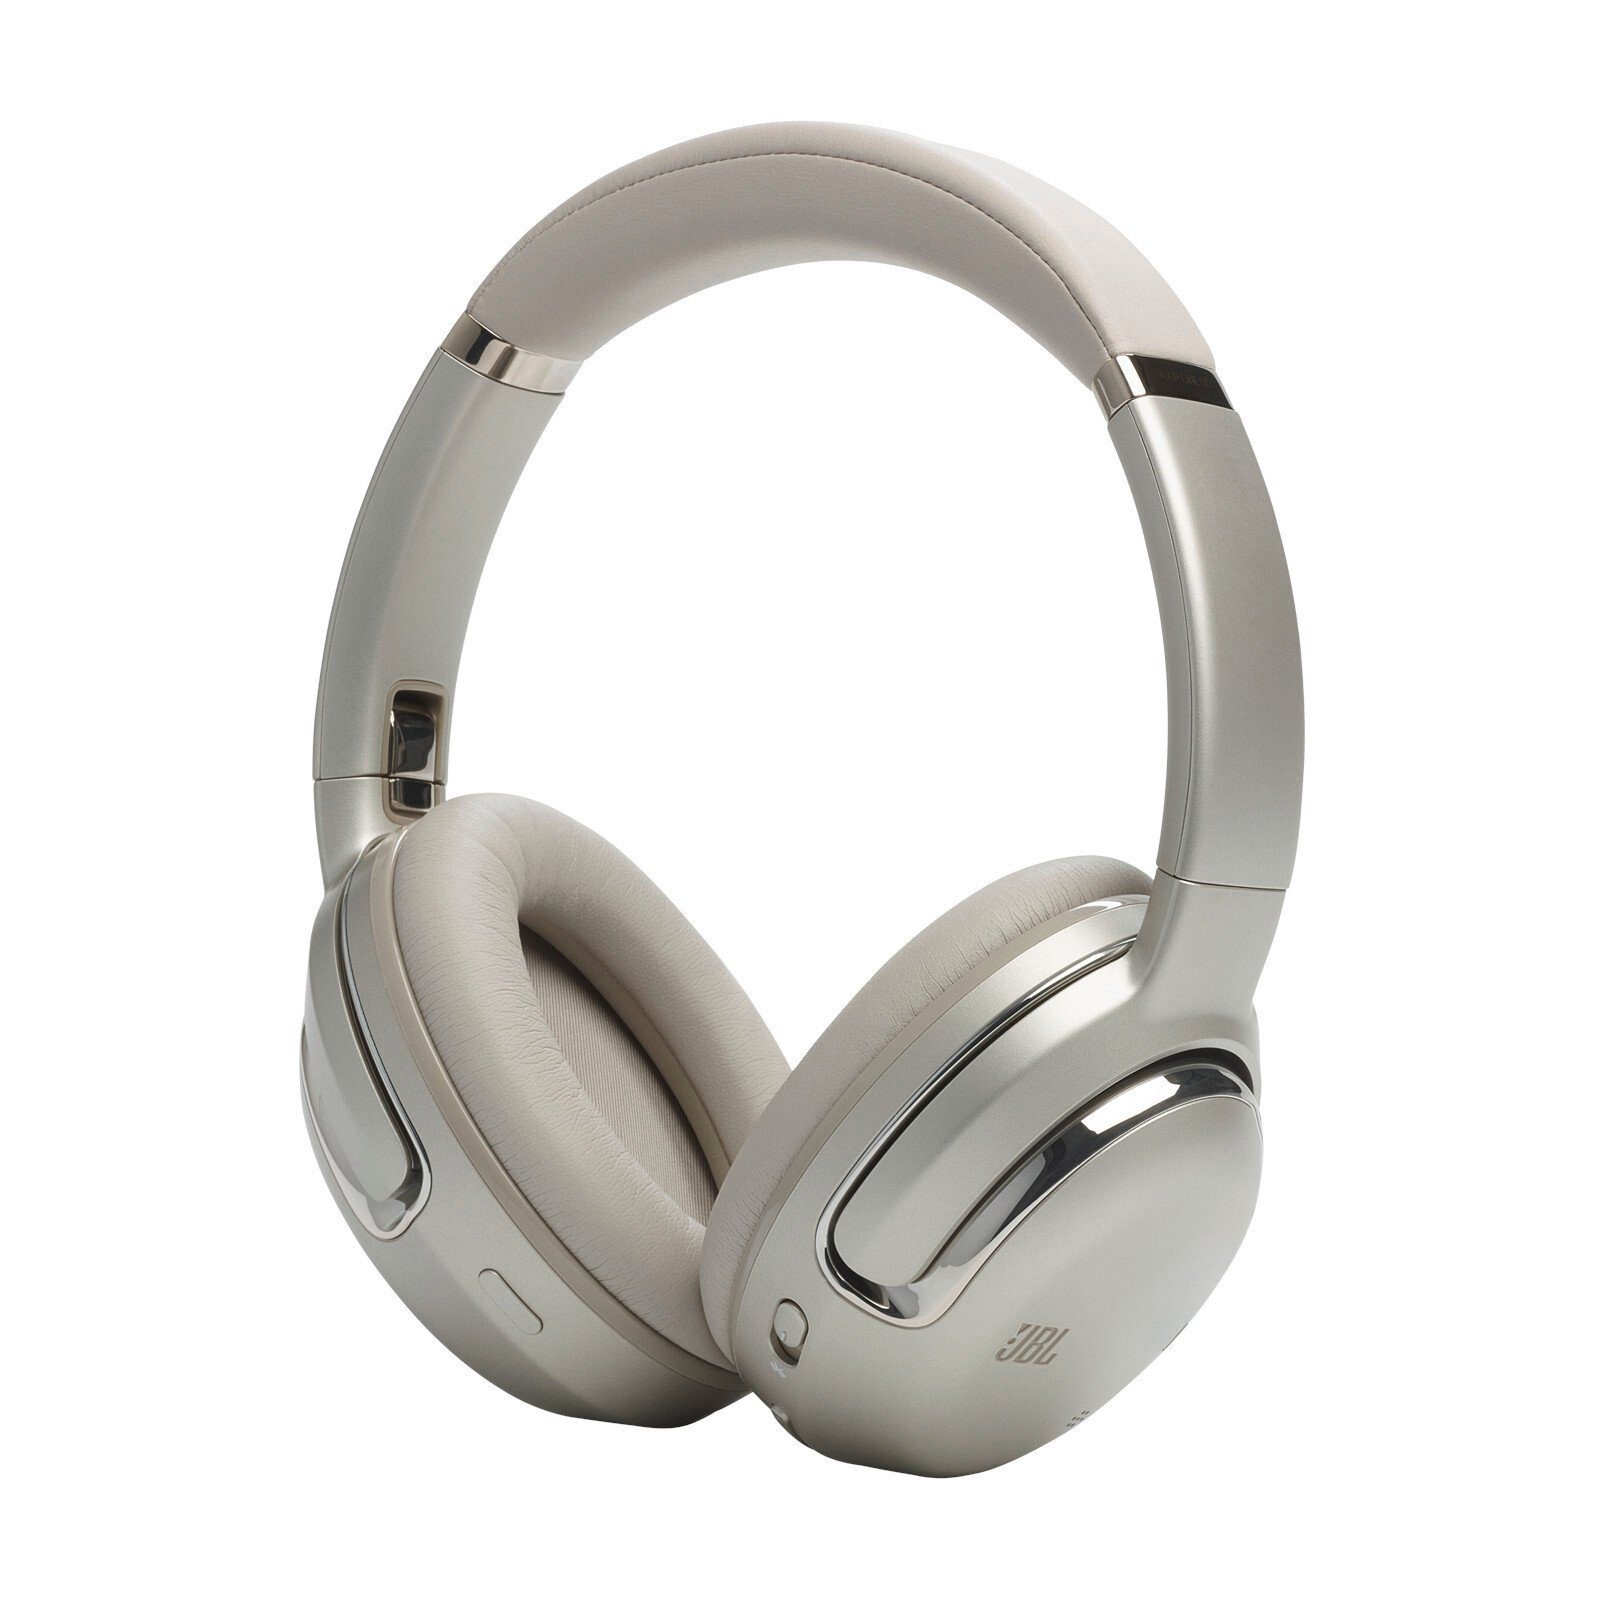 JBL TOUR ONE M2 Headset Champagne (Noise-Cancelling)